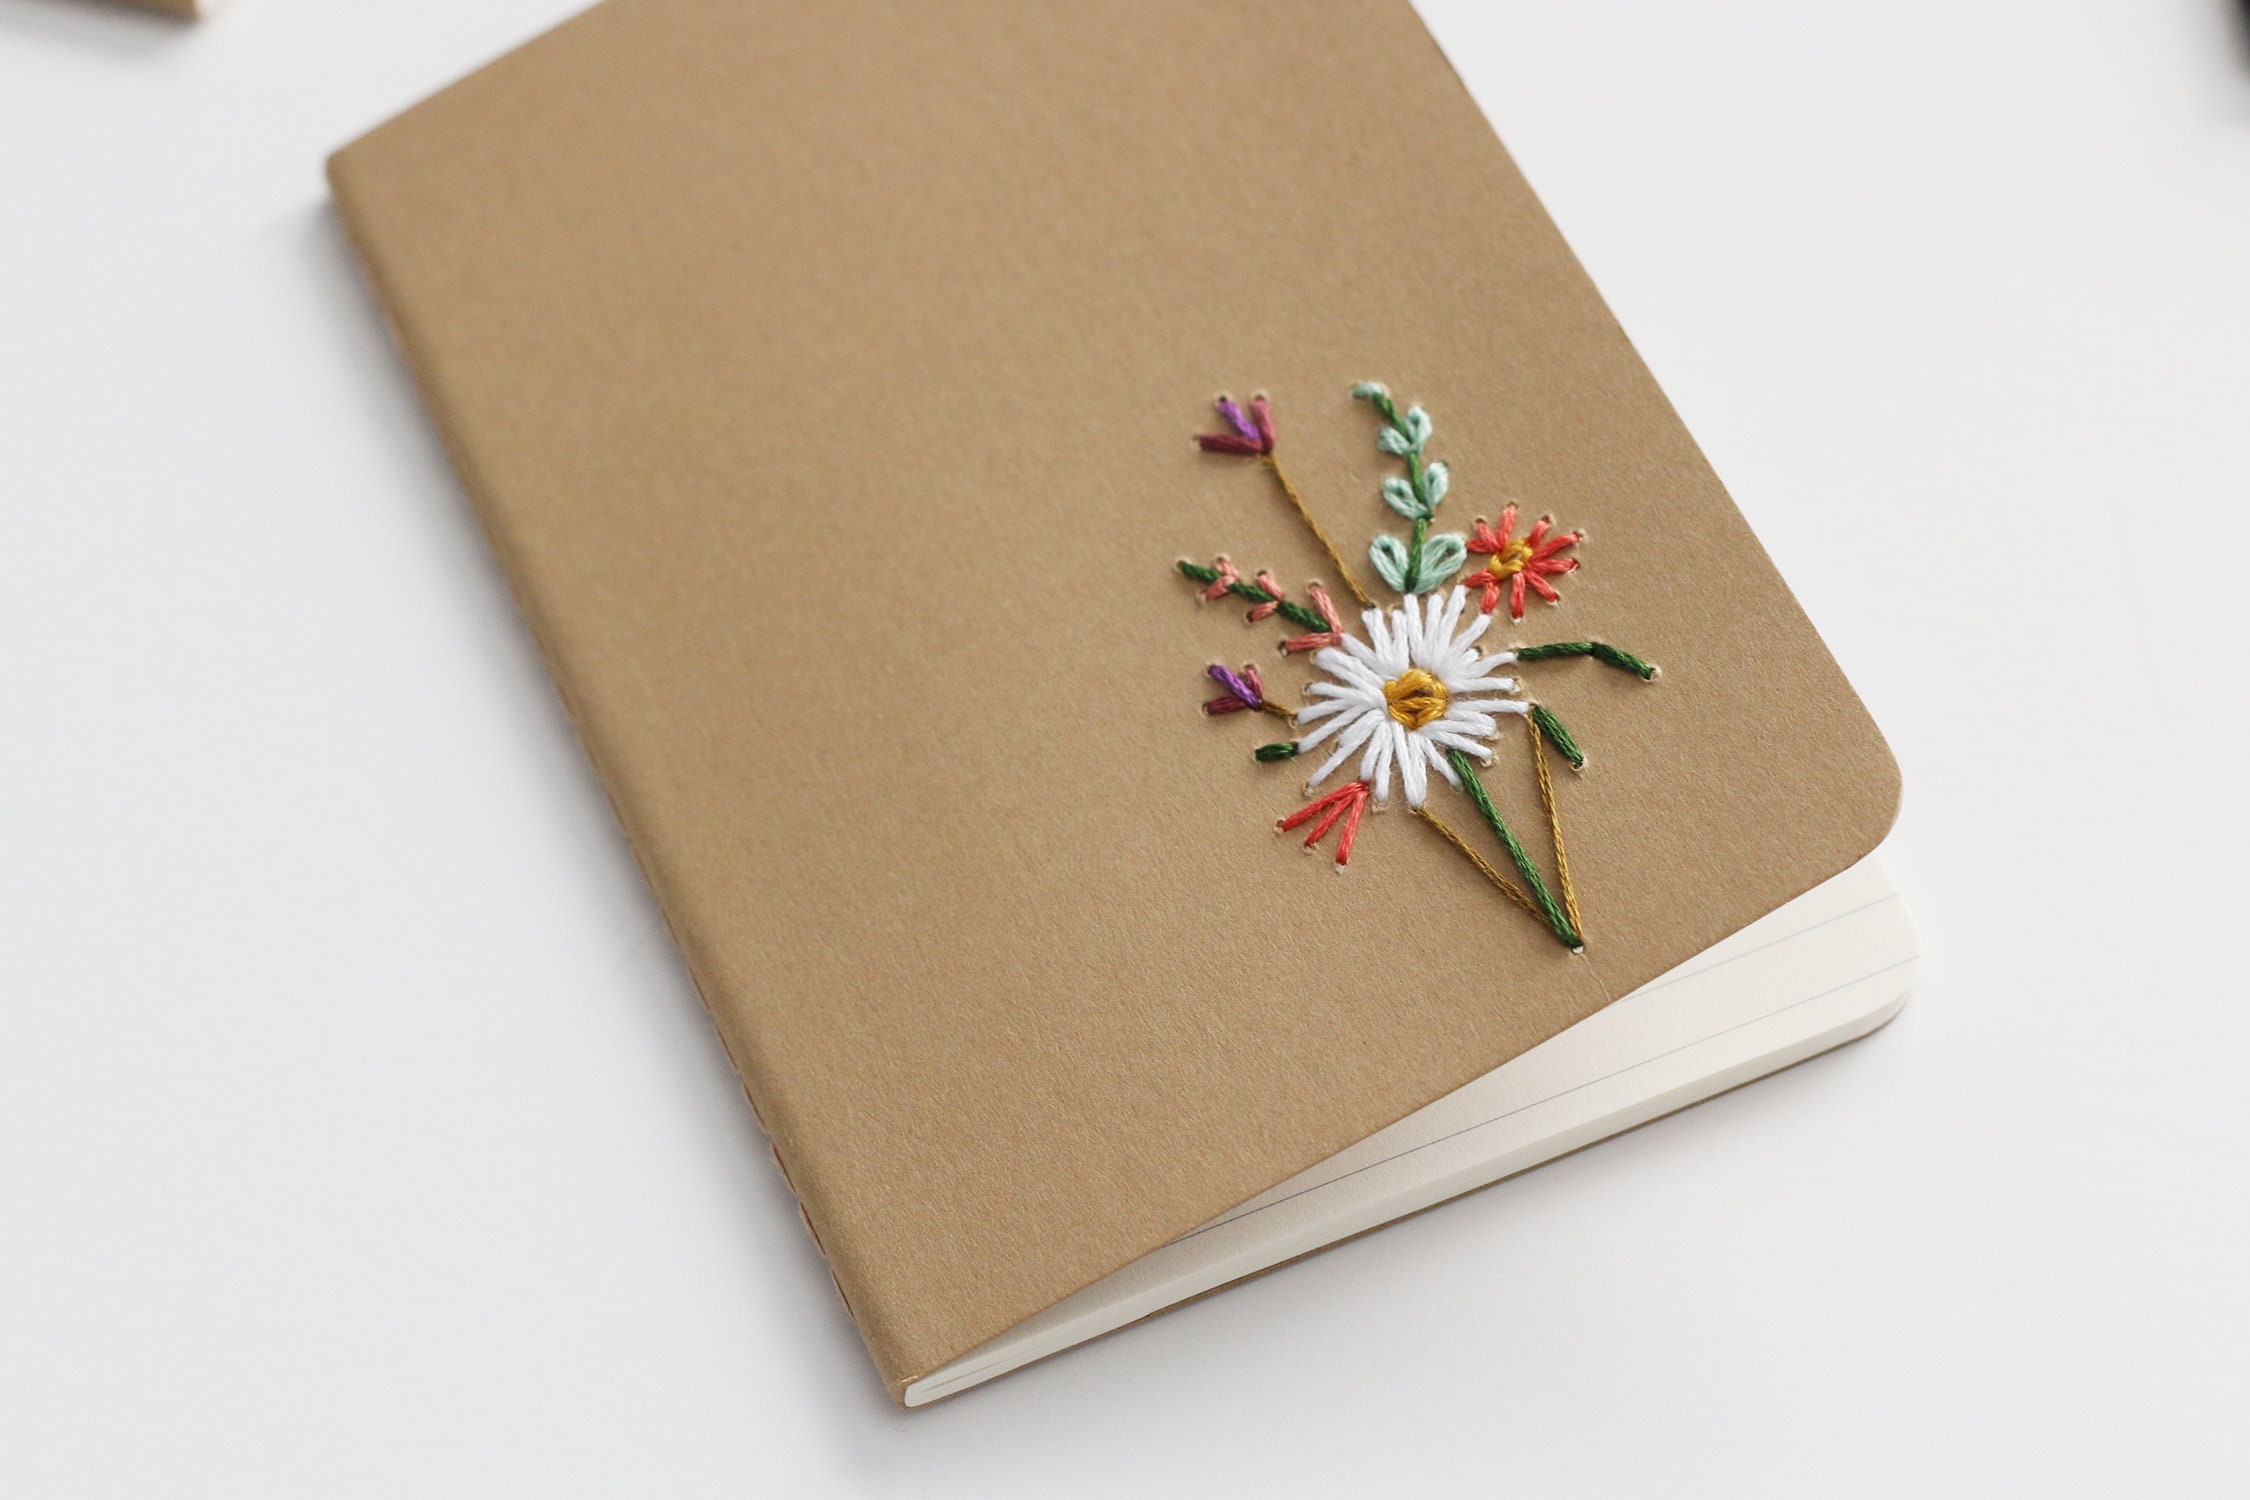 Embroidered Fabric Stitch Book to Make for Sketch, Journal or Needlework  PDF 